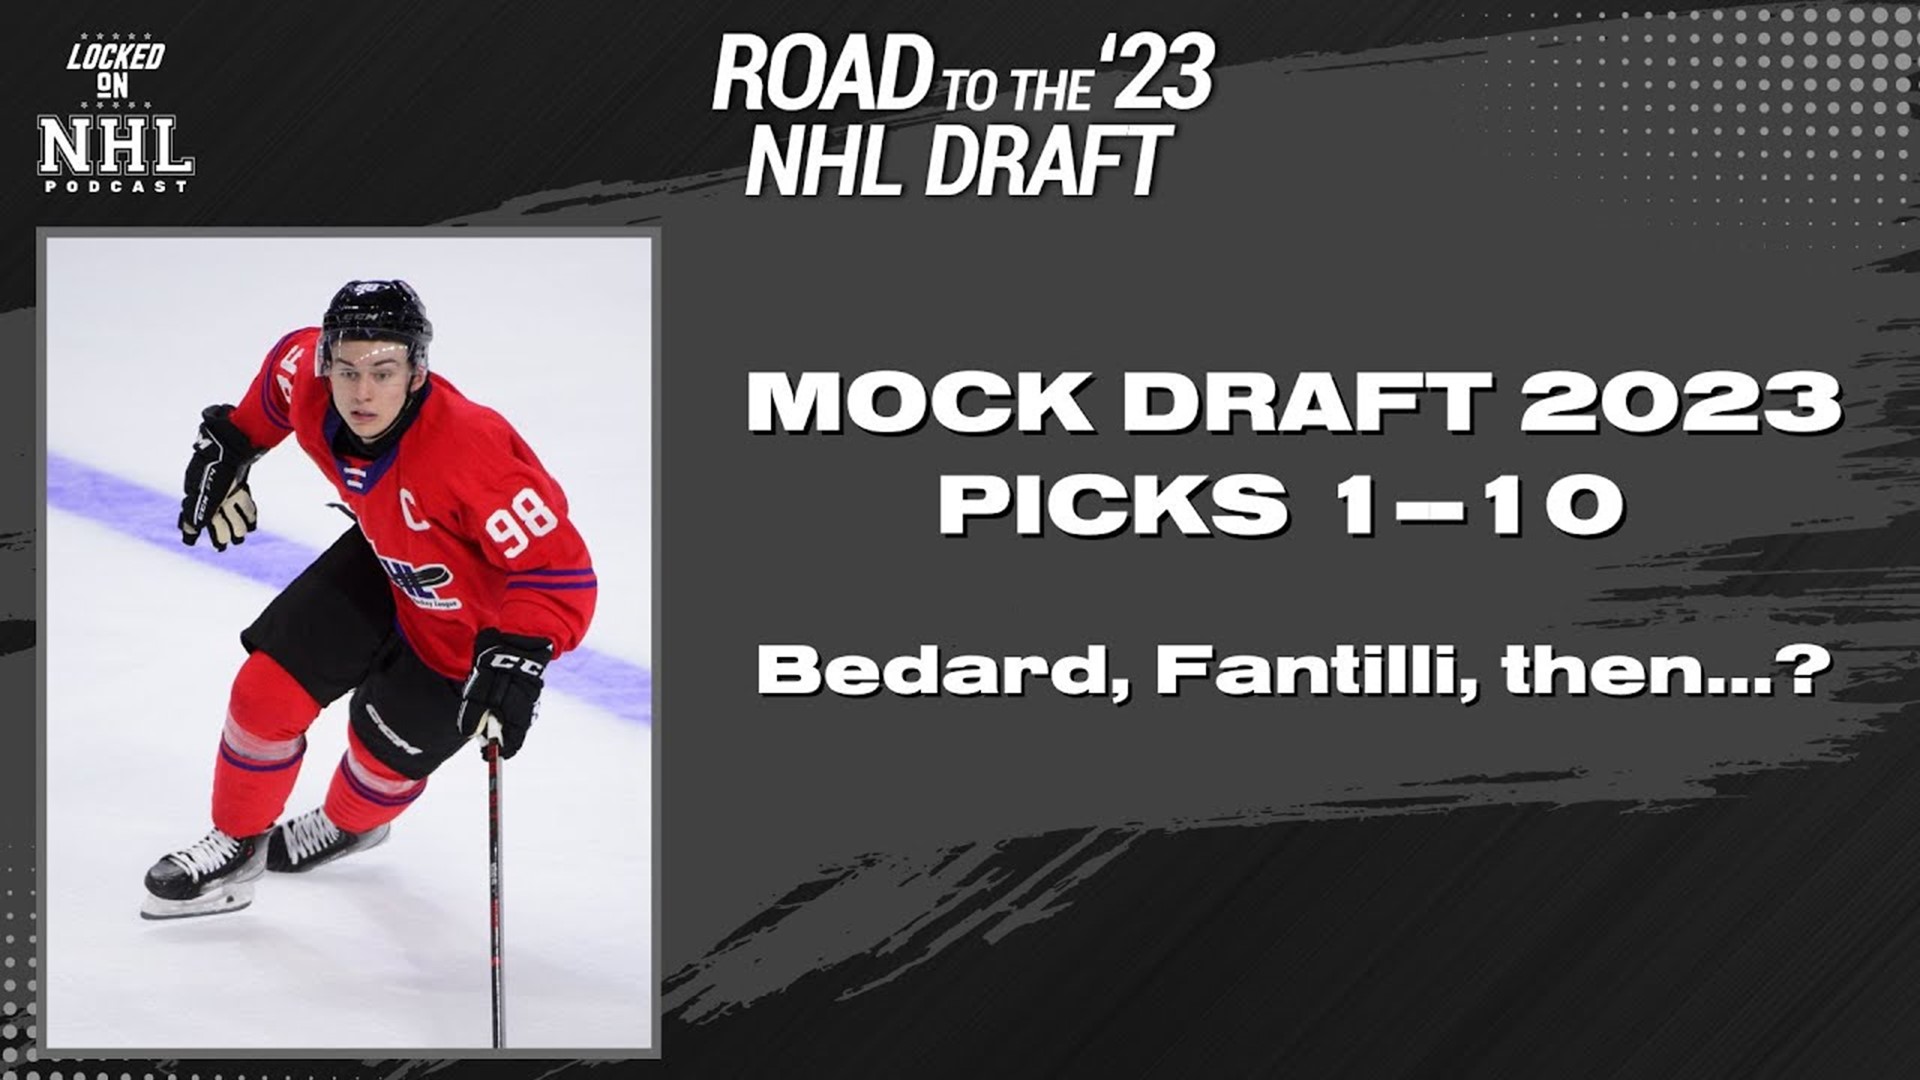 In part one of Locked On's 2023 NHL Mock Draft Special, Gil Martin (Locked On NHL) and Hadi Kalakeche (Locked On NHL Prospects) offer their analysis